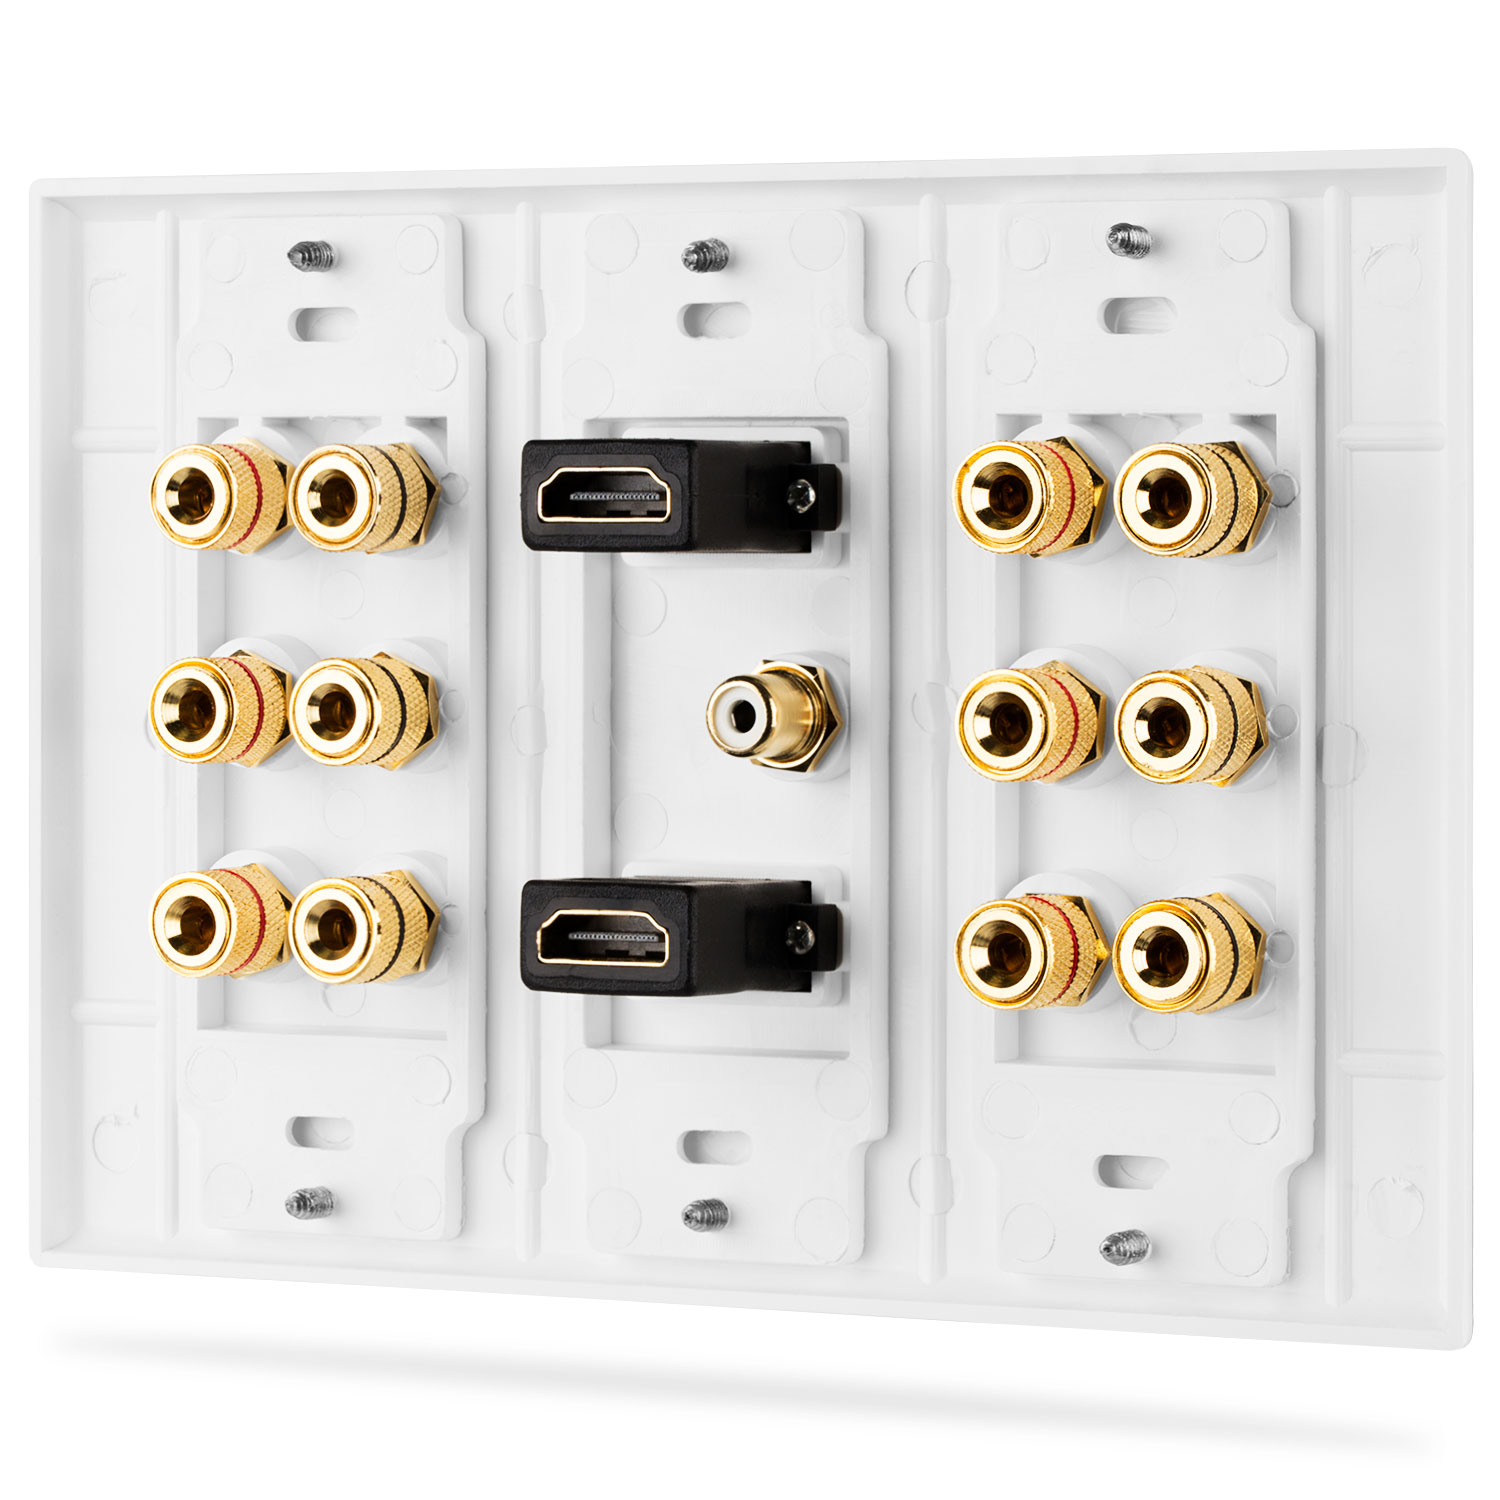 Fosmon HD8005 [3-Gang 6.1 Surround Distribution] Home Theater Copper Banana Binding Post Coupler Type Wall Plate for 6 Speakers, 1 RCA Jack for Subwoofer & 2 HDMI Ports - image 2 of 7